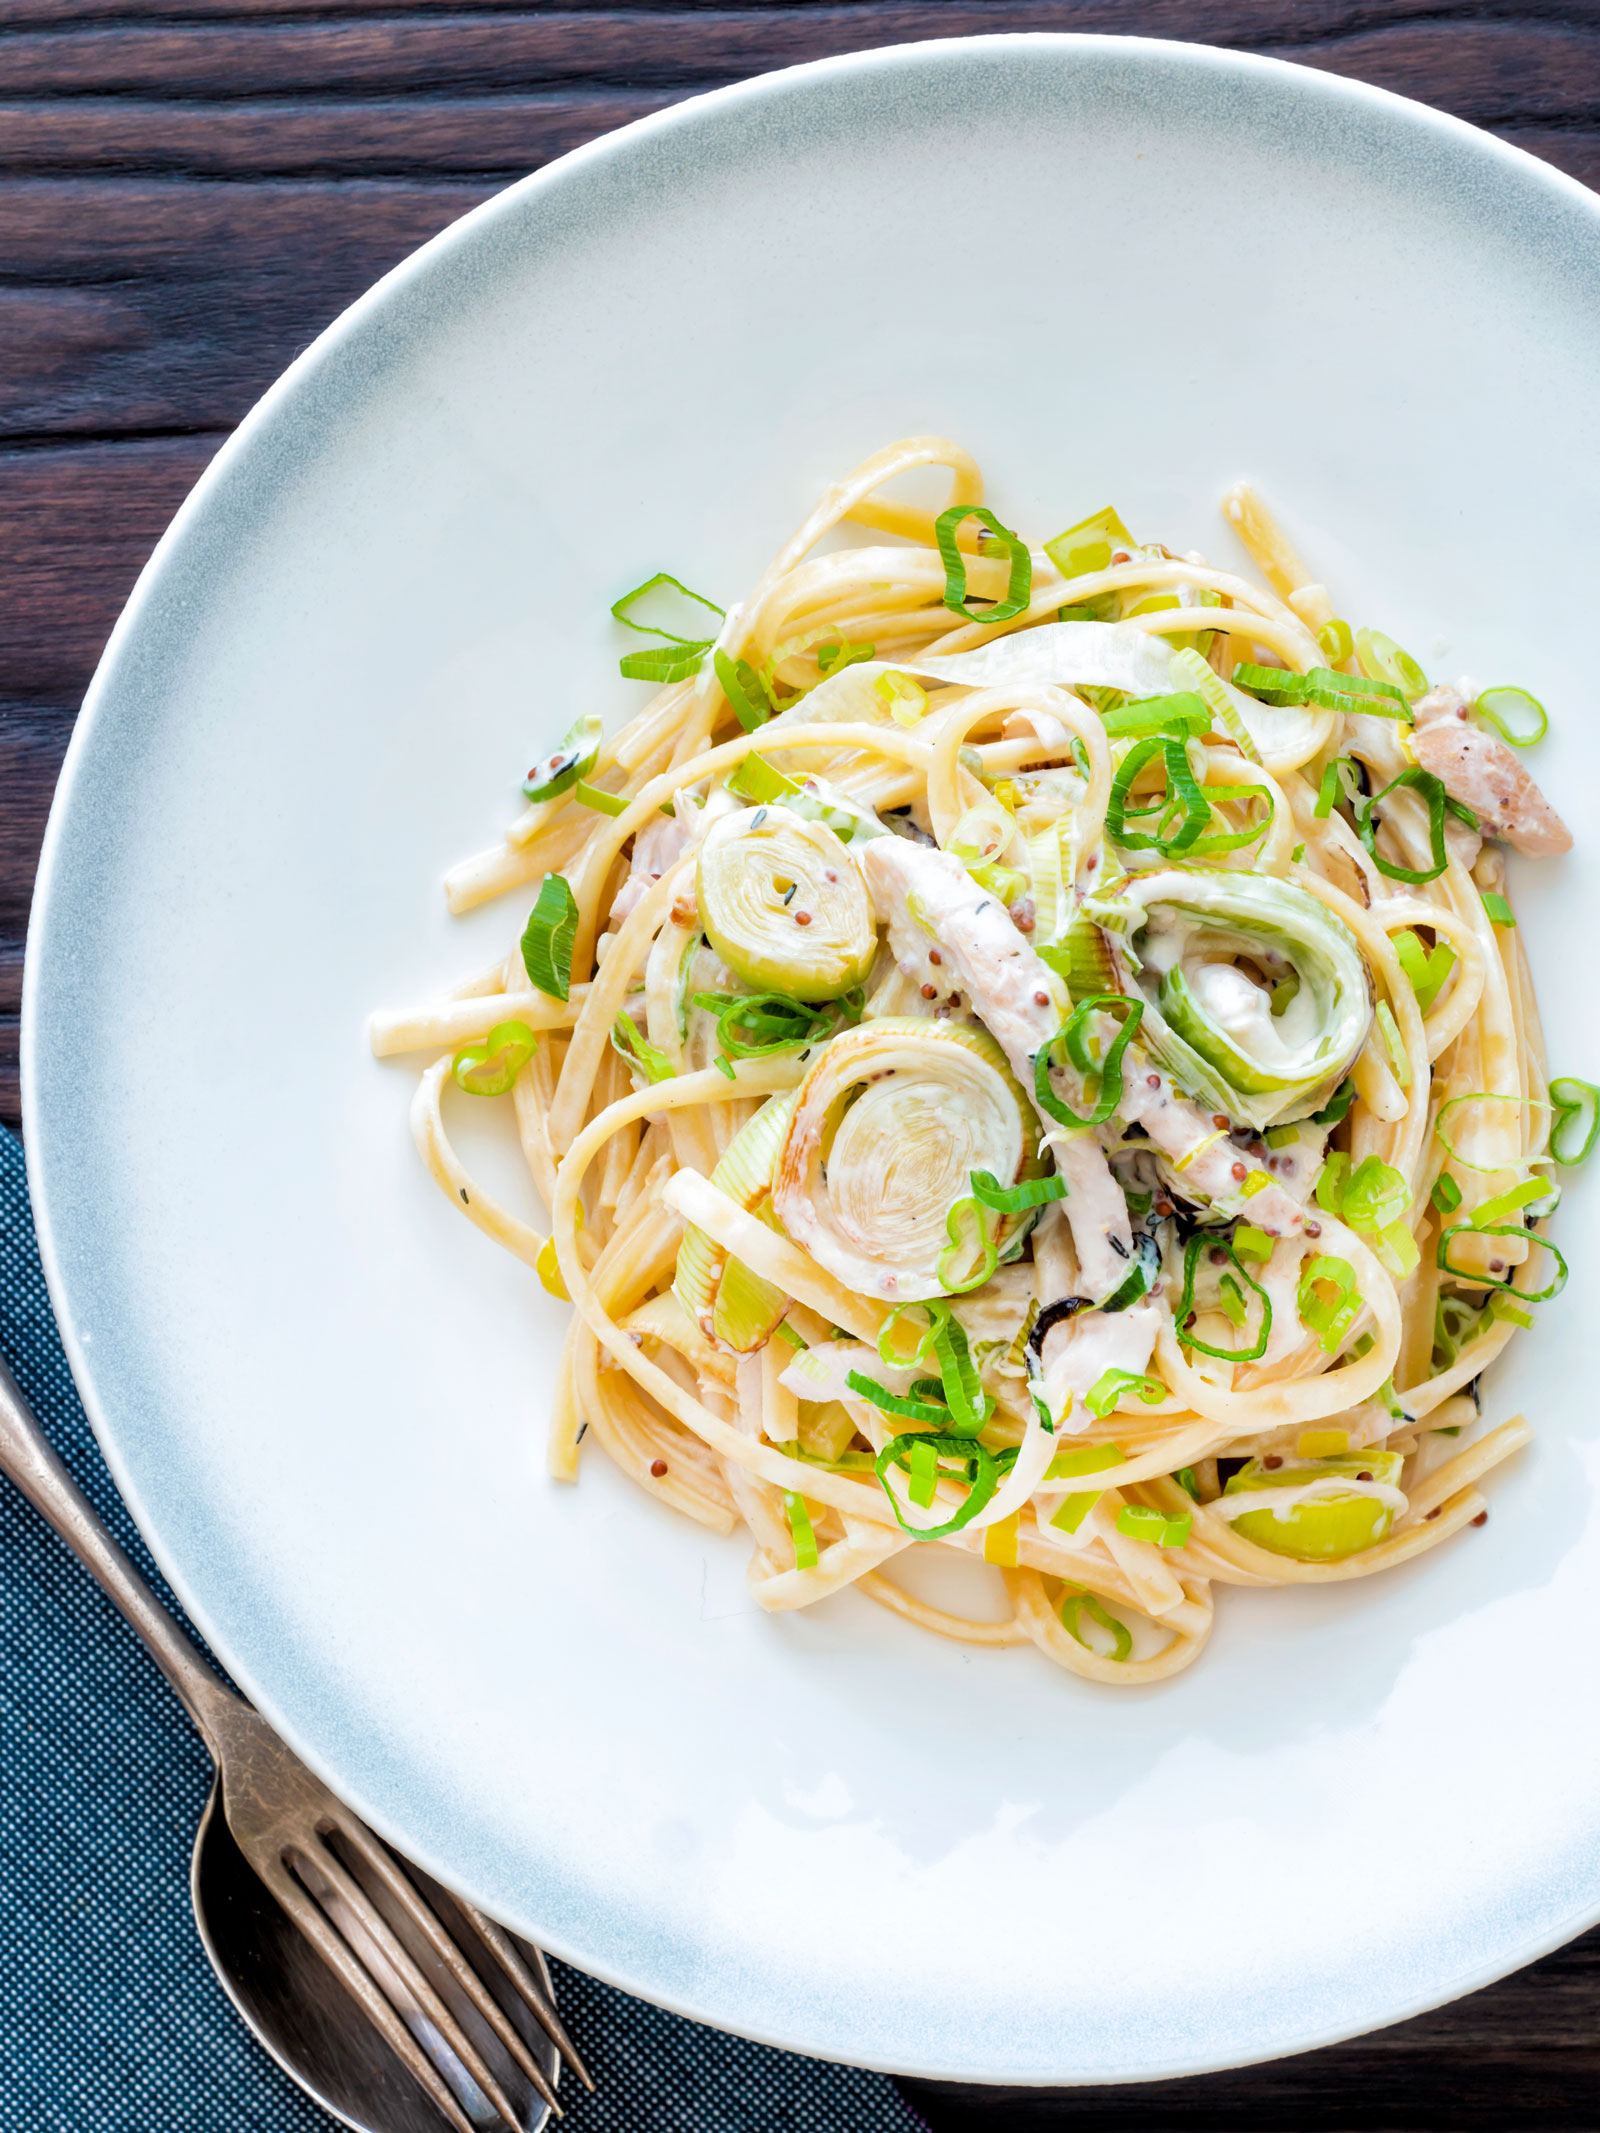 Overhead chicken and leek pasta with linguini in a mustard and creme fraiche sauce.